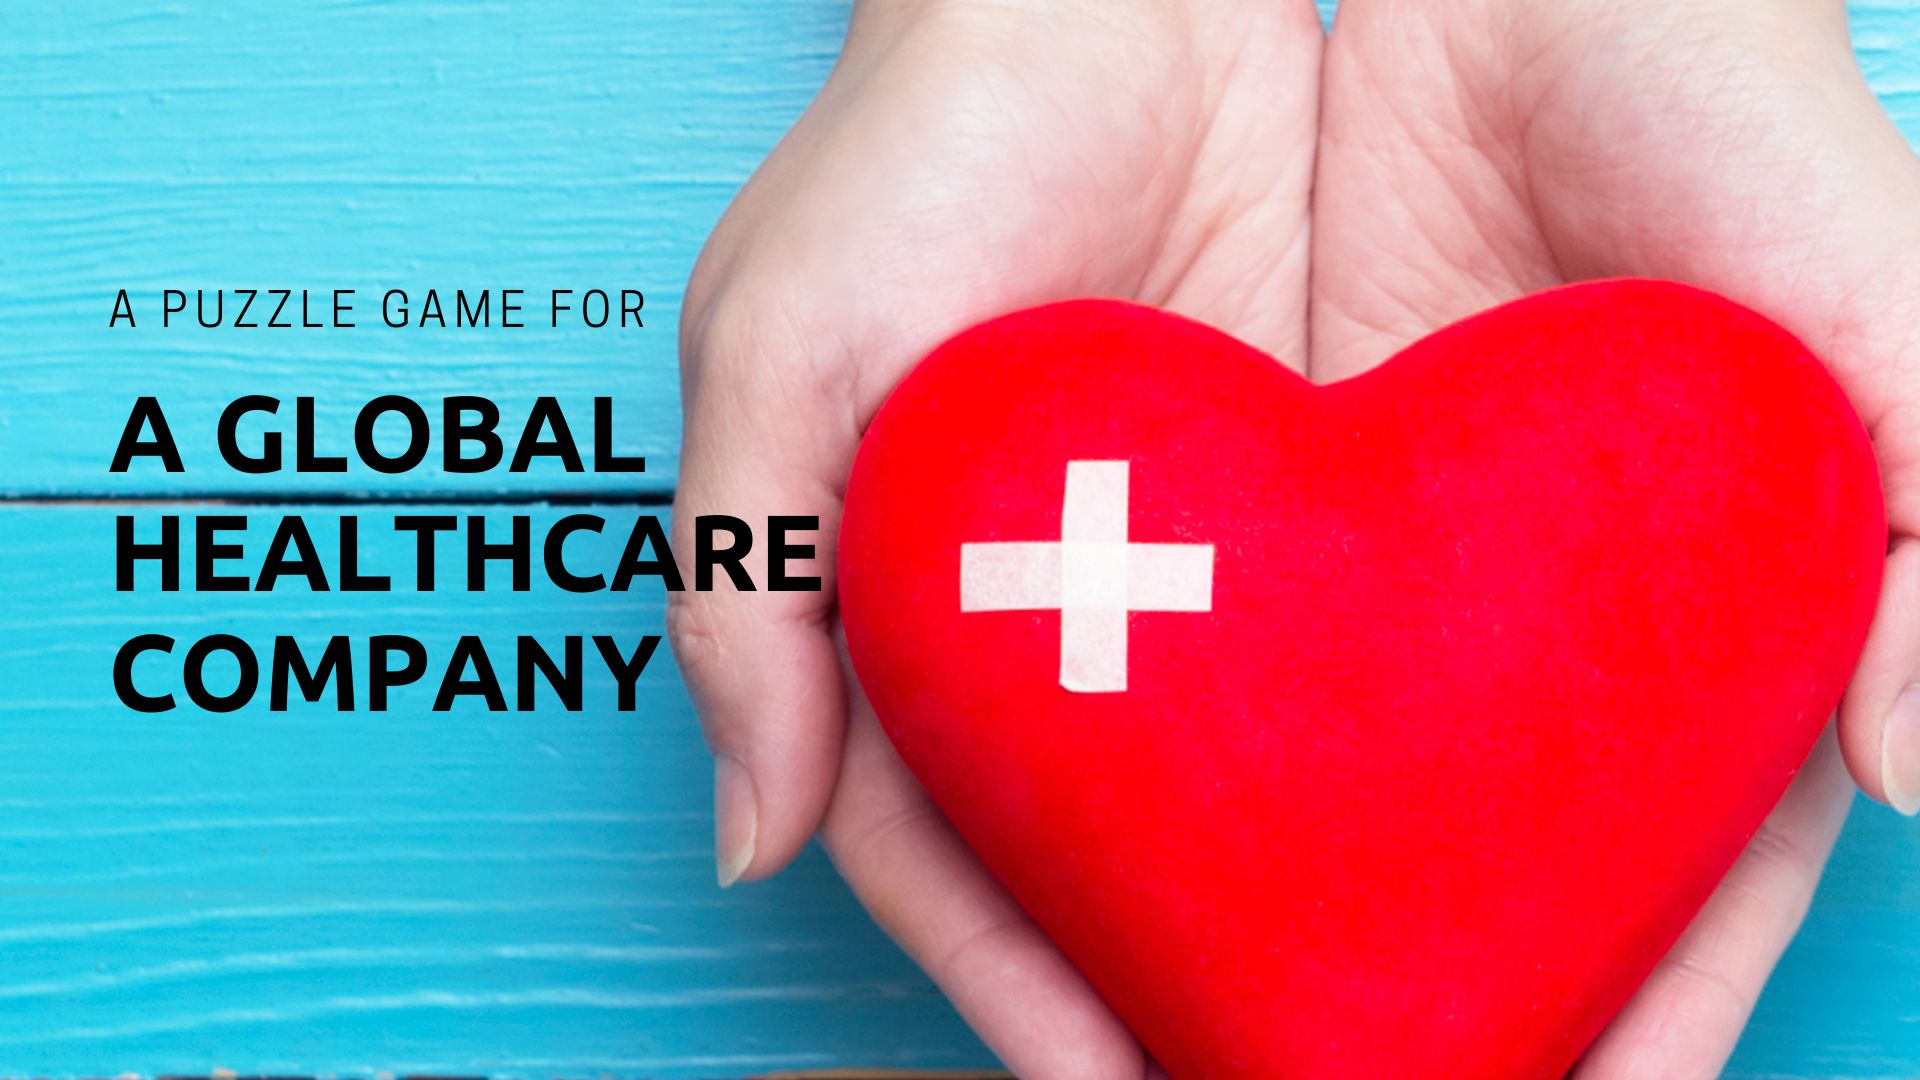 A Puzzle Game for a Global Healthcare Company